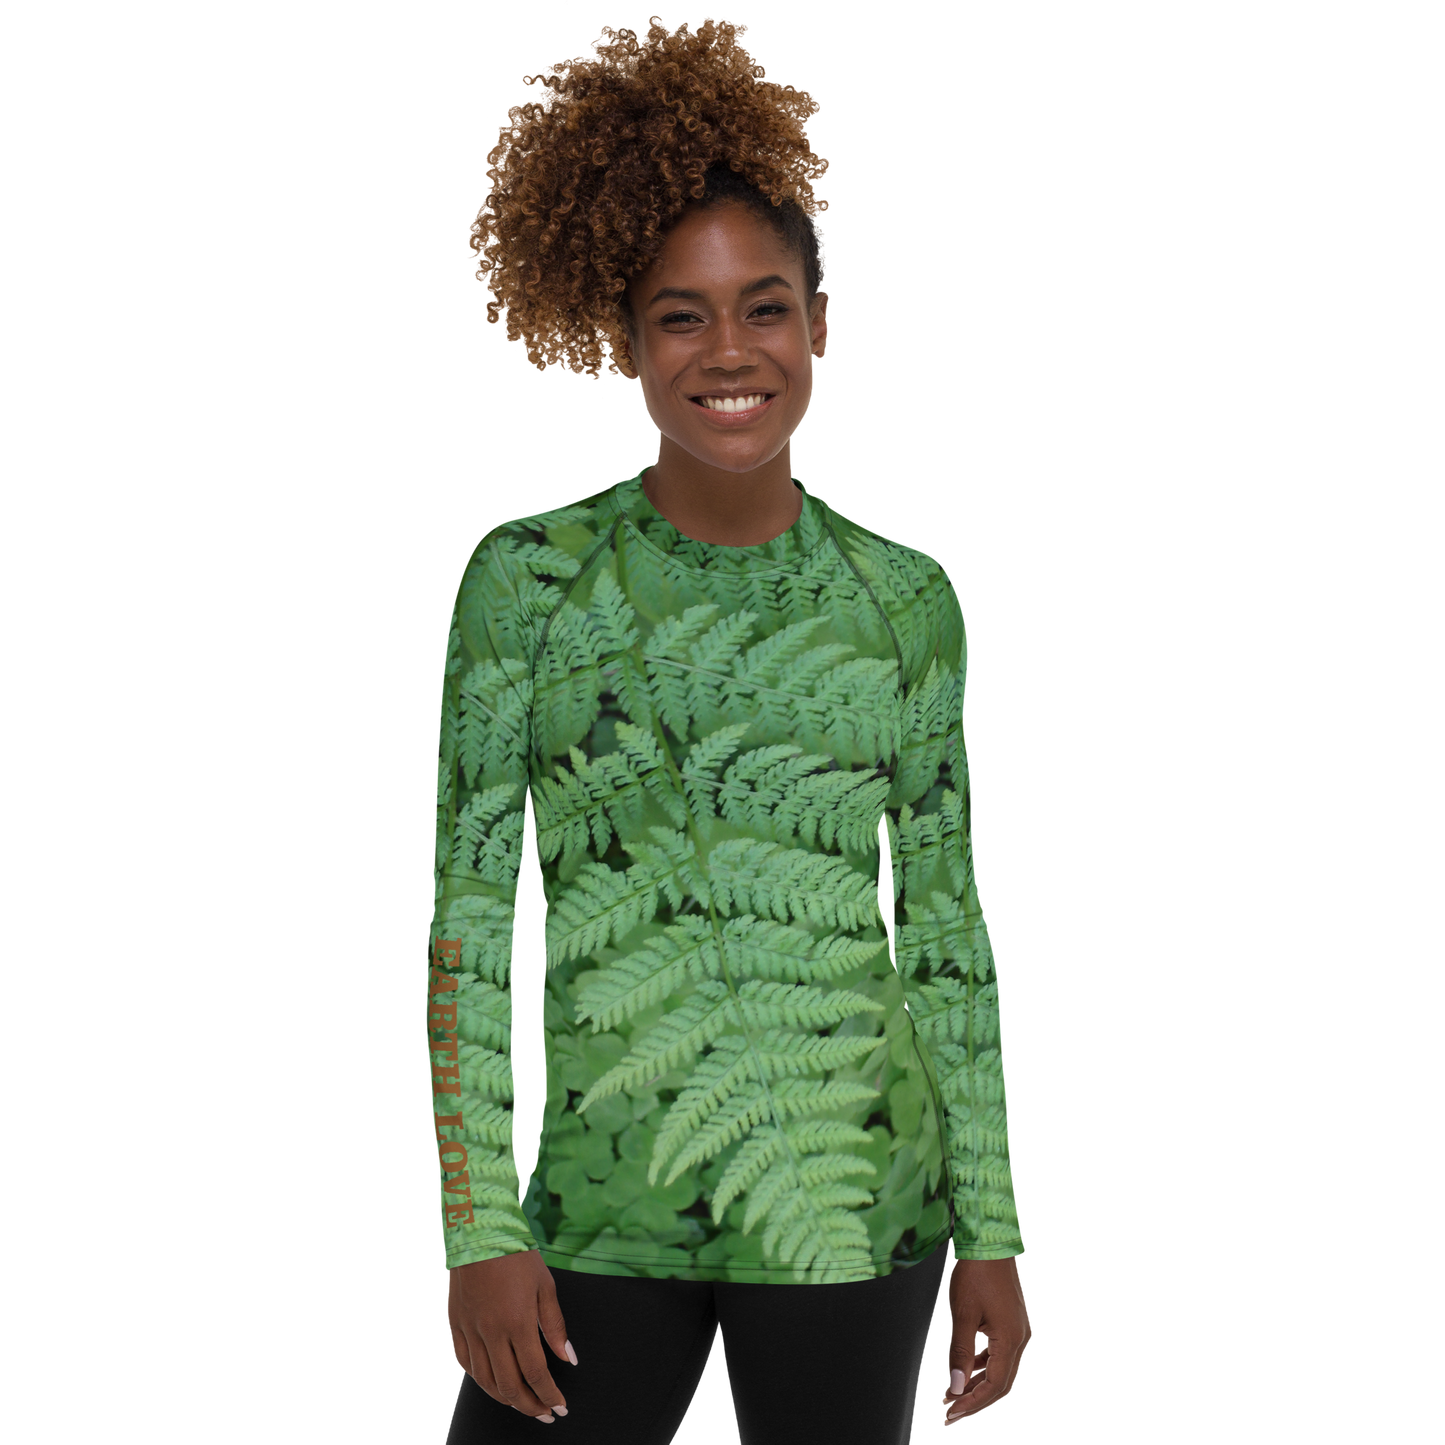 The EARTH LOVE Collection - "A Forest Fern" Design Luxurious Women's Rash Guard, Sun Protective Clothing, Sports & Fitness Clothing